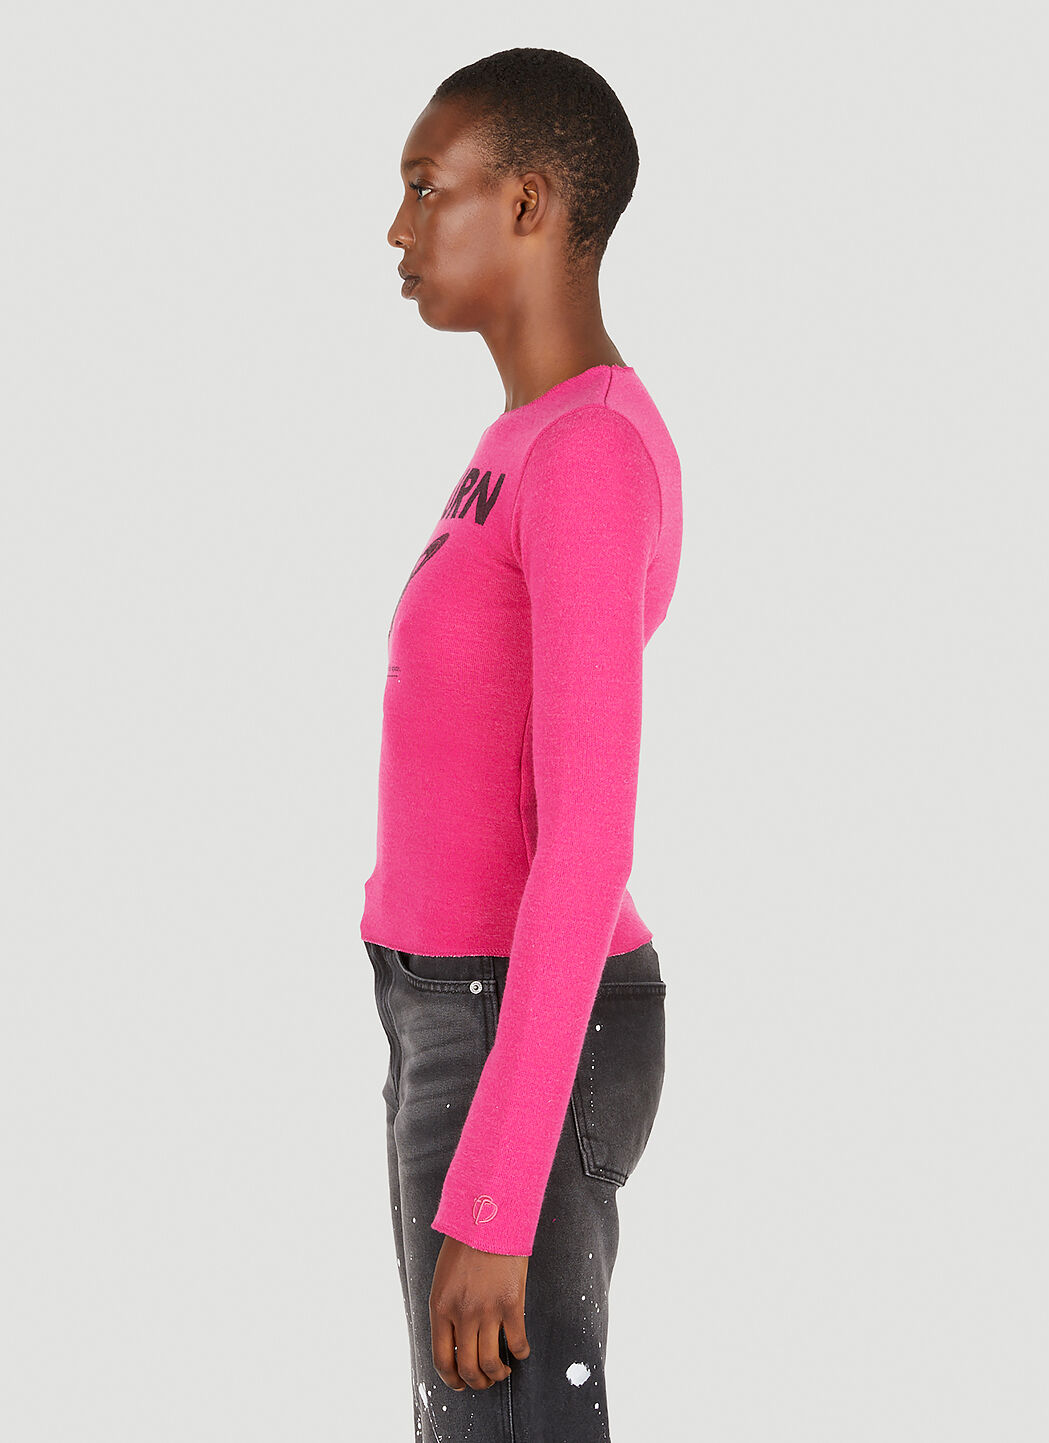 TheOpen Product Women's Saturn Knit Top in Pink | LN-CC®